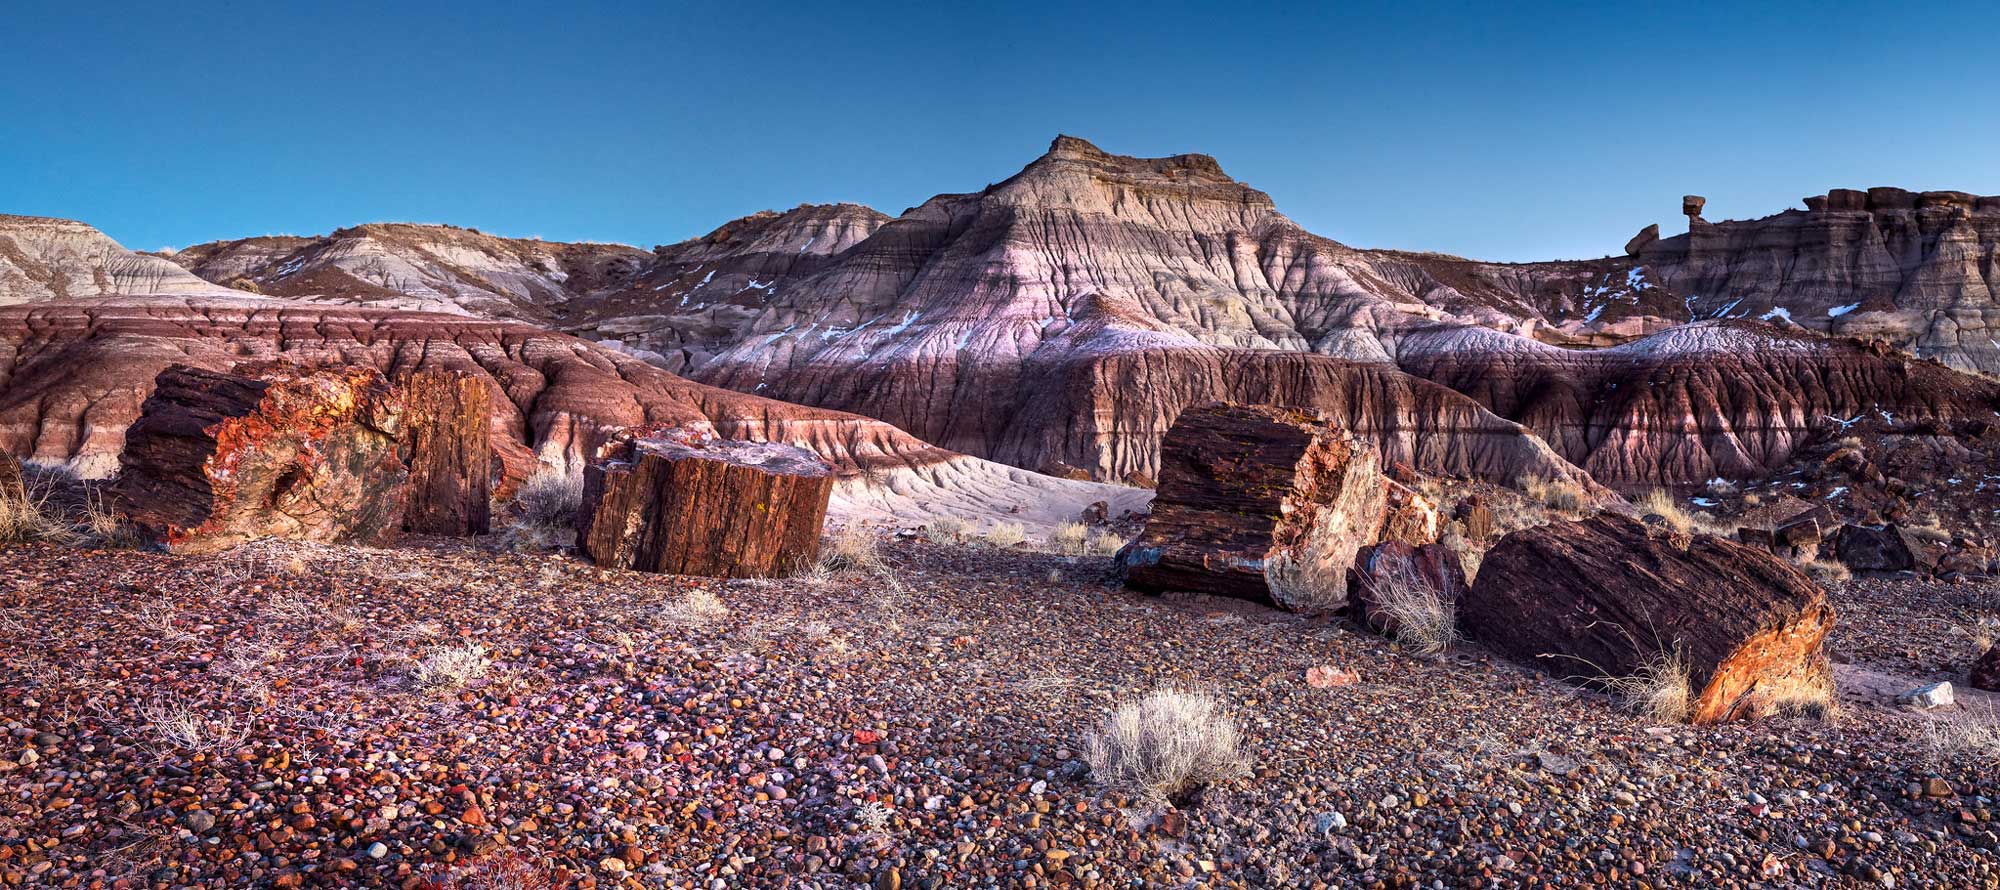 Photograph of chucks of petrified wood at Petrified Forest National Park.